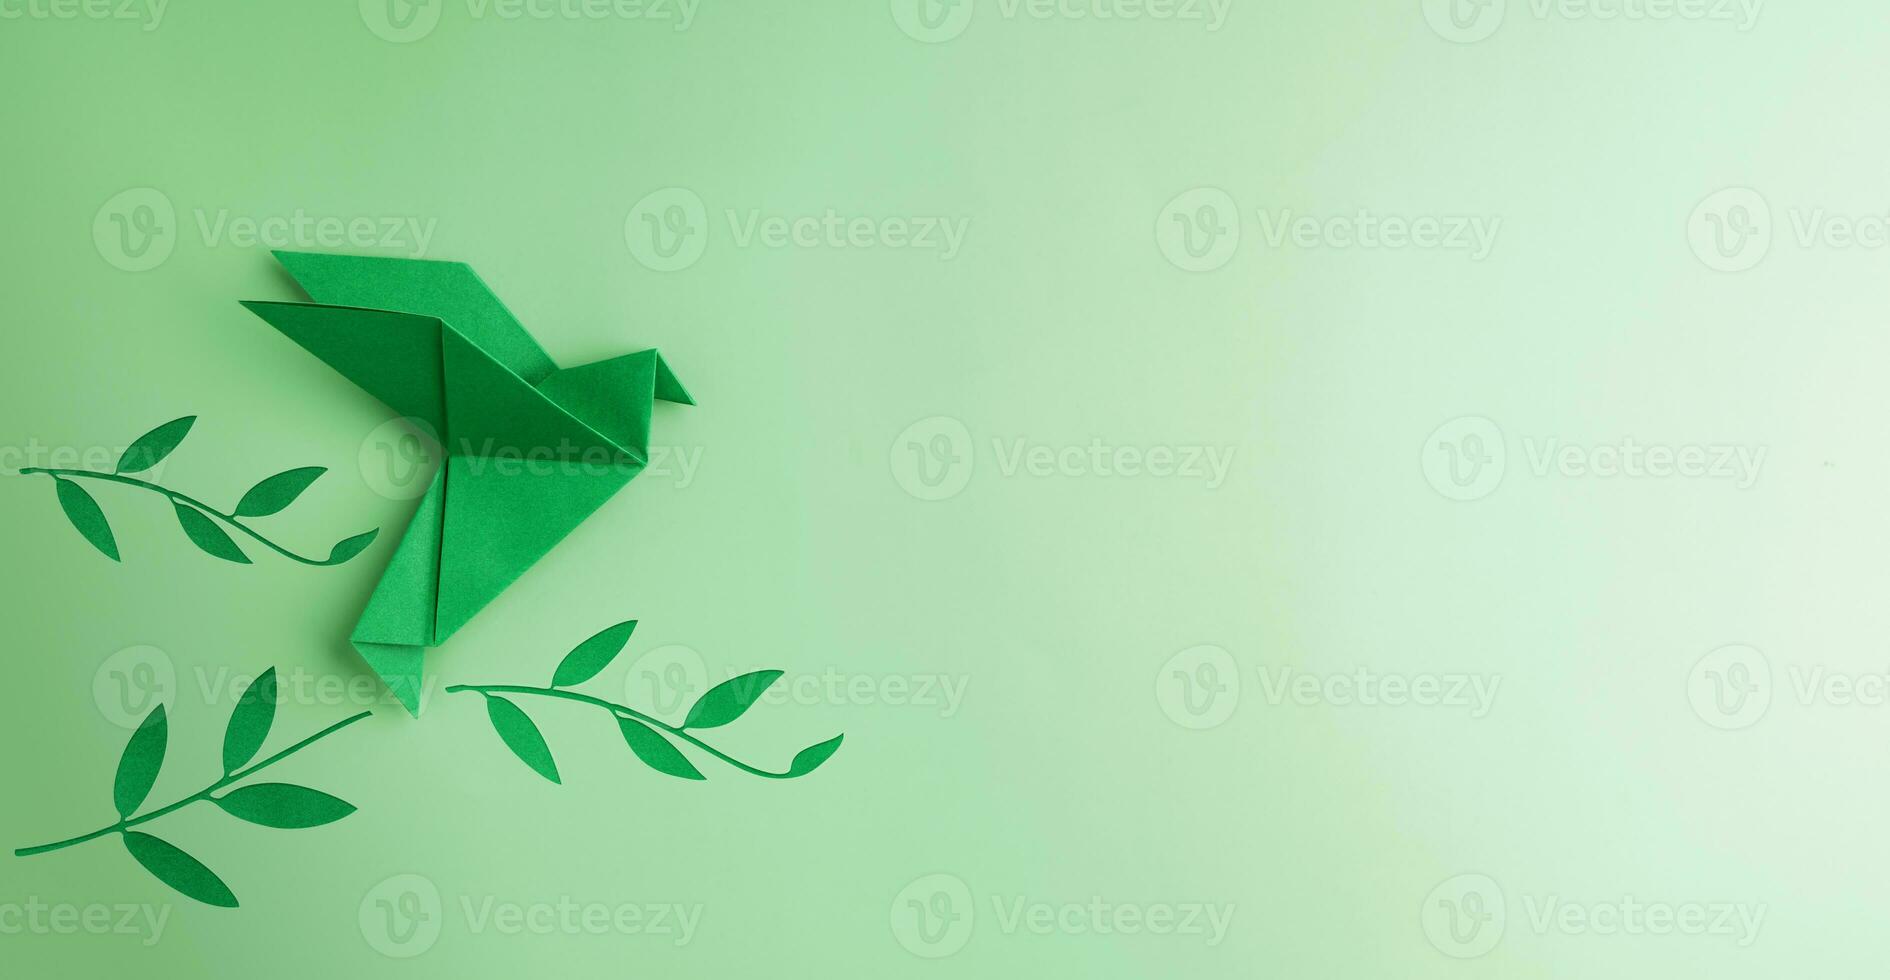 Peace and New Beginnings of Hope. A Green Dove Flying over green Olive Branch. World International Peace Day. The Concept of a Fluttering Bird that brings Peaceful to the World photo